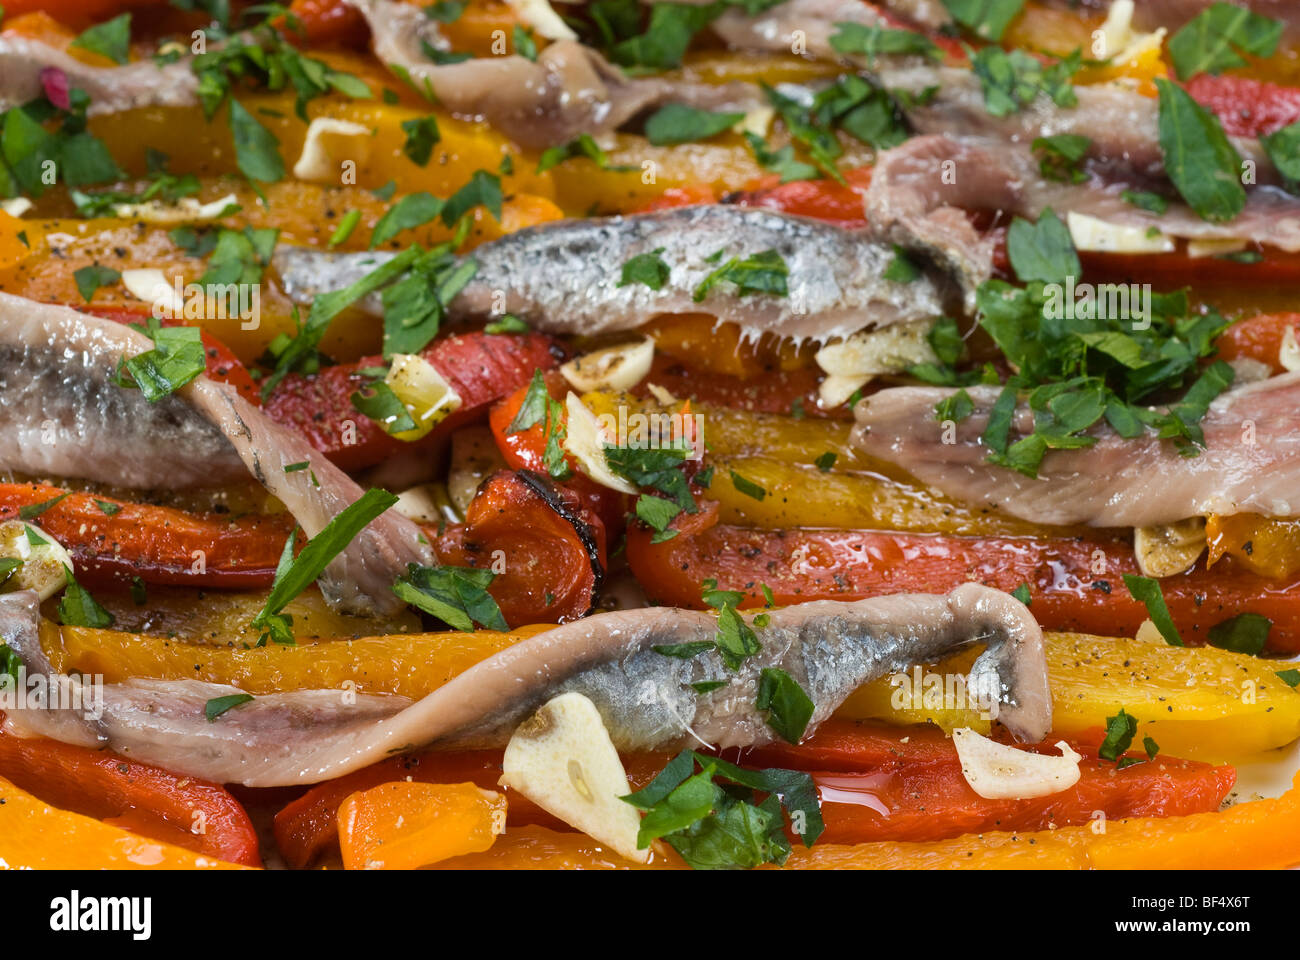 Anchovy fillets with capsicum stripes with garlic, olive oil and parsley Stock Photo